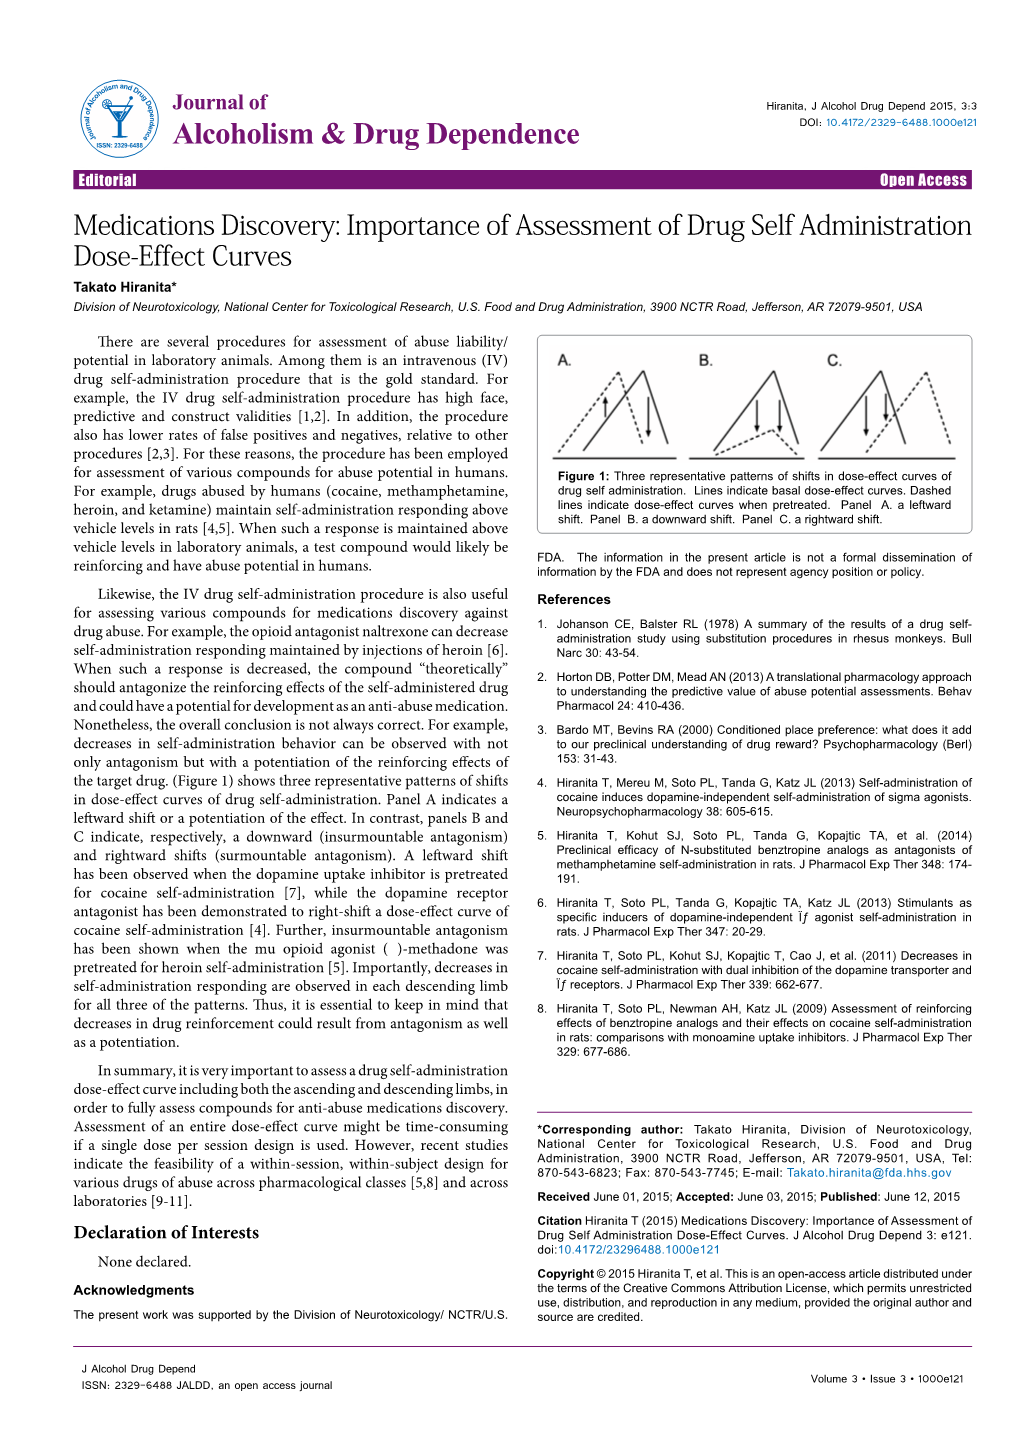 Importance of Assessment of Drug Self Administration Dose-Effect Curves Takato Hiranita* Division of Neurotoxicology, National Center for Toxicological Research, U.S